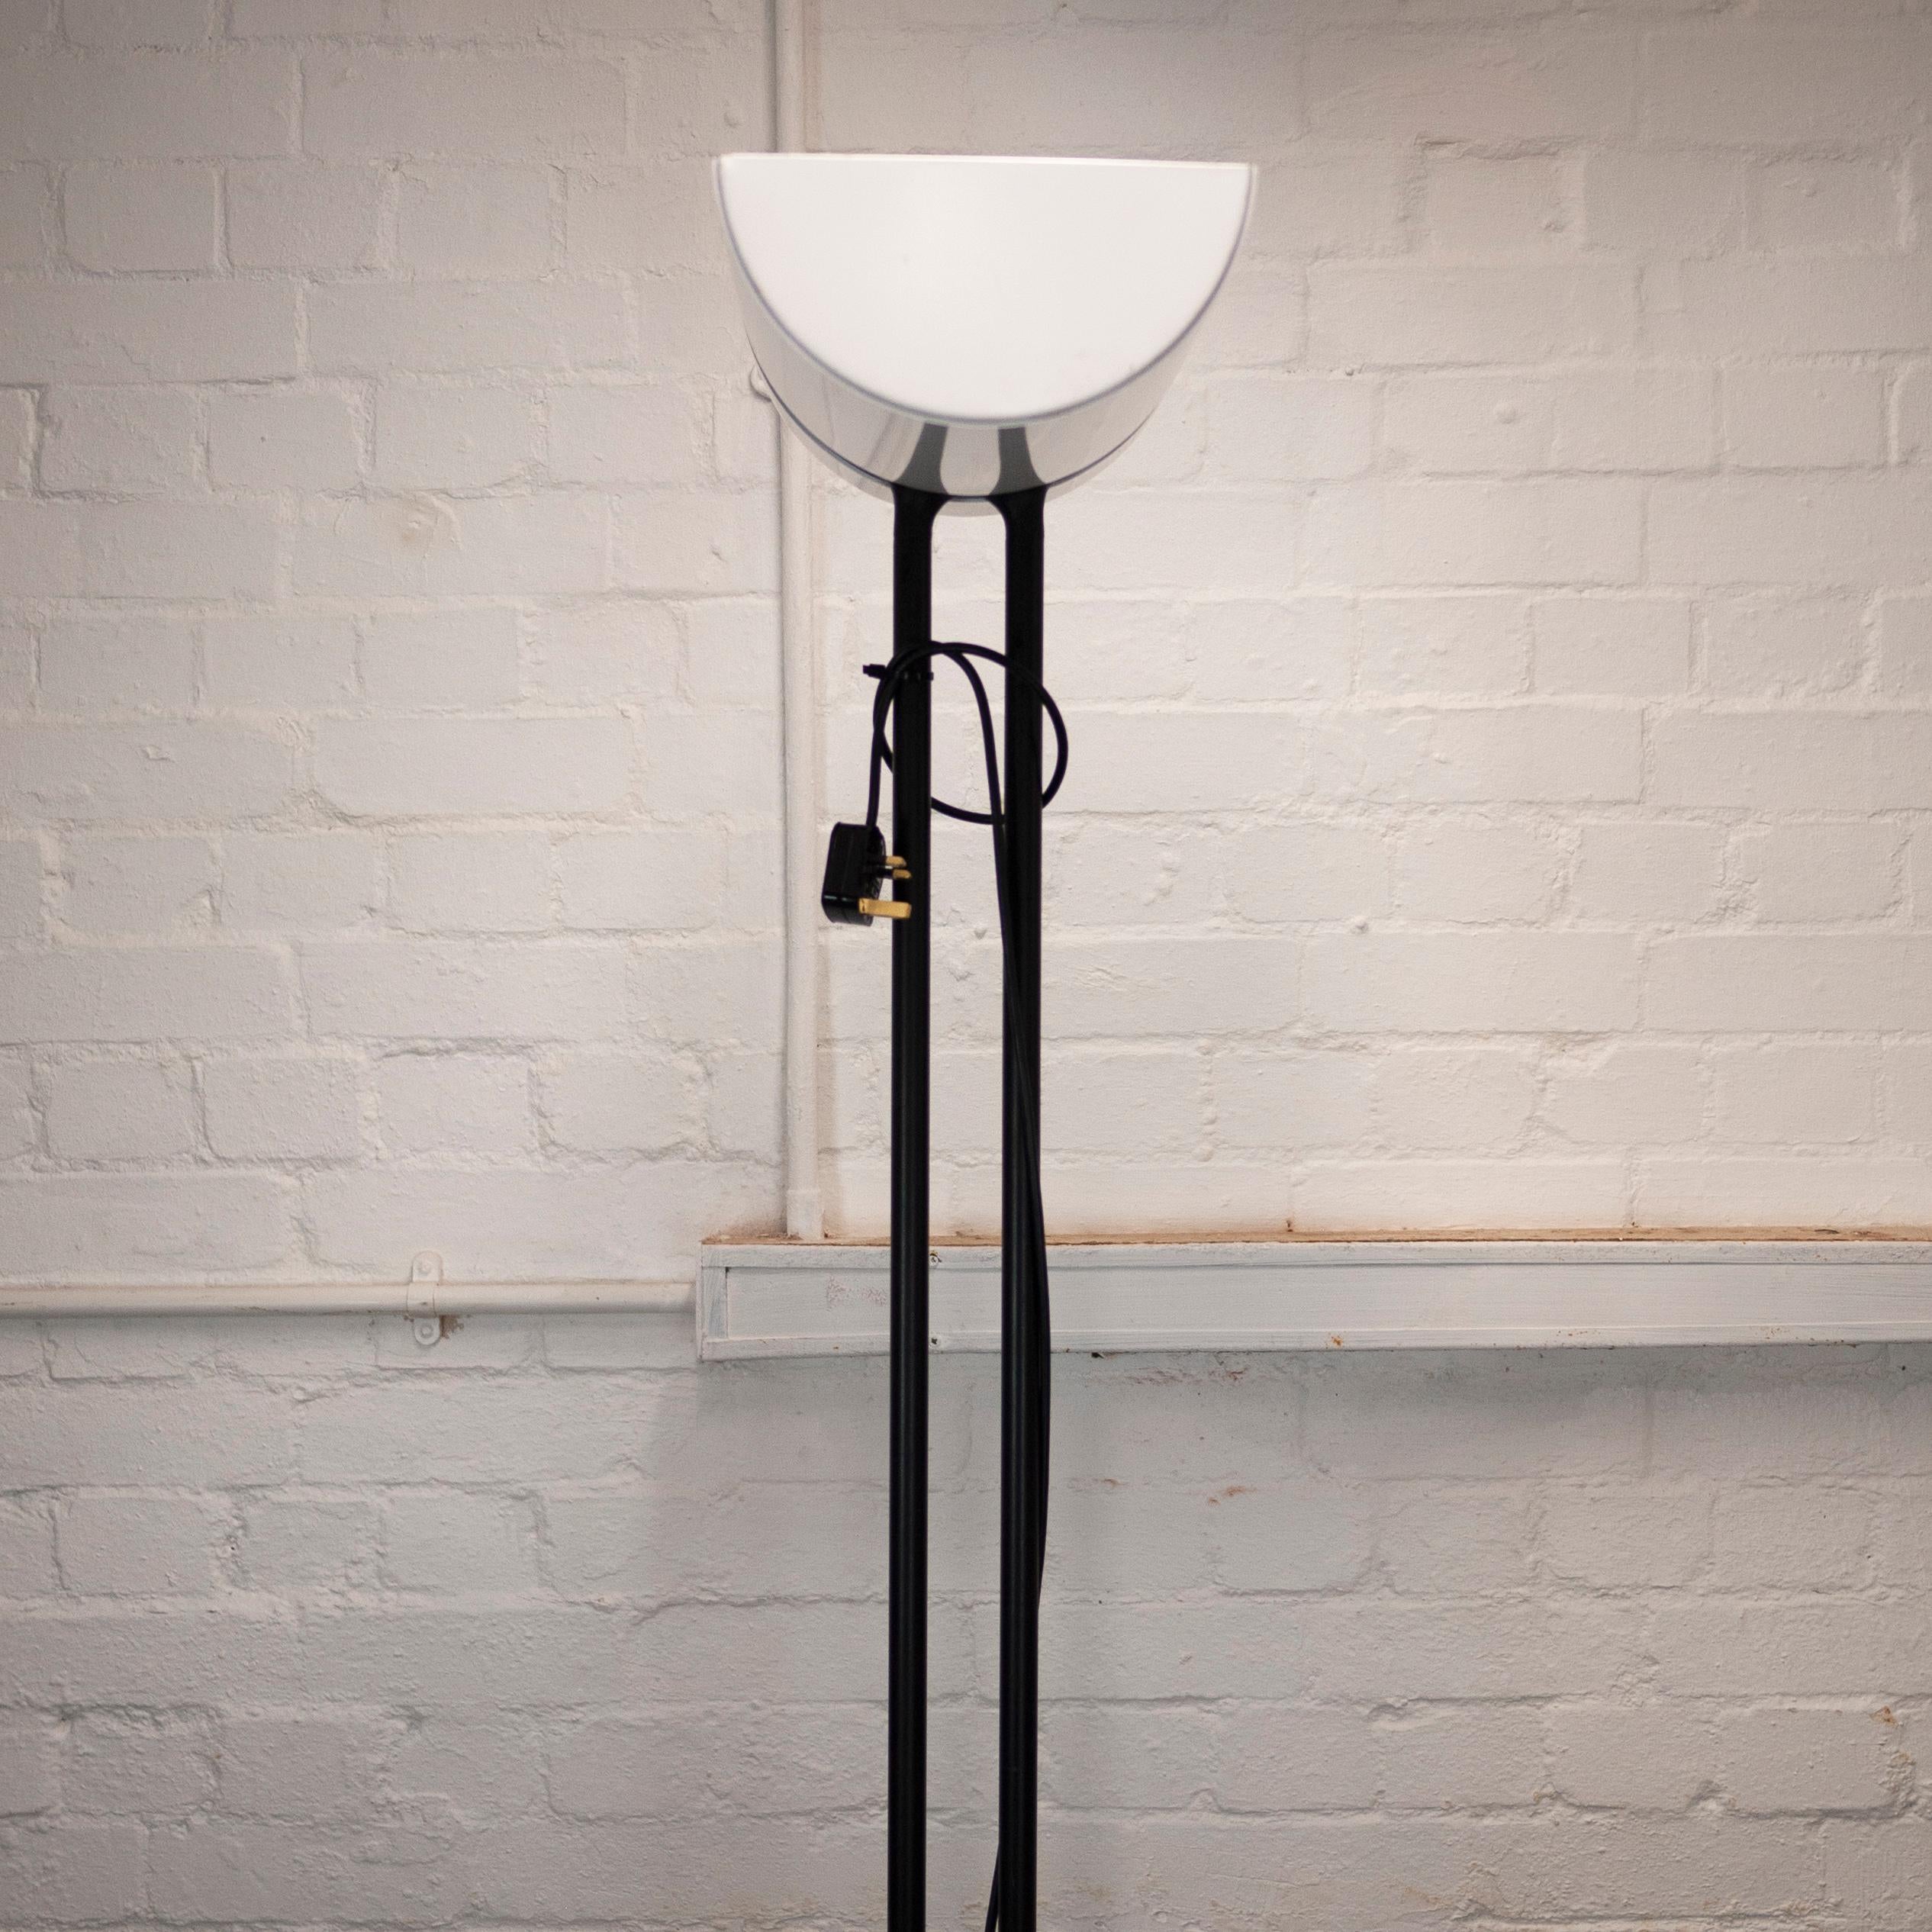 Vintage Black and White Double Stem Factory Floor Lamp, 1980s For Sale 1